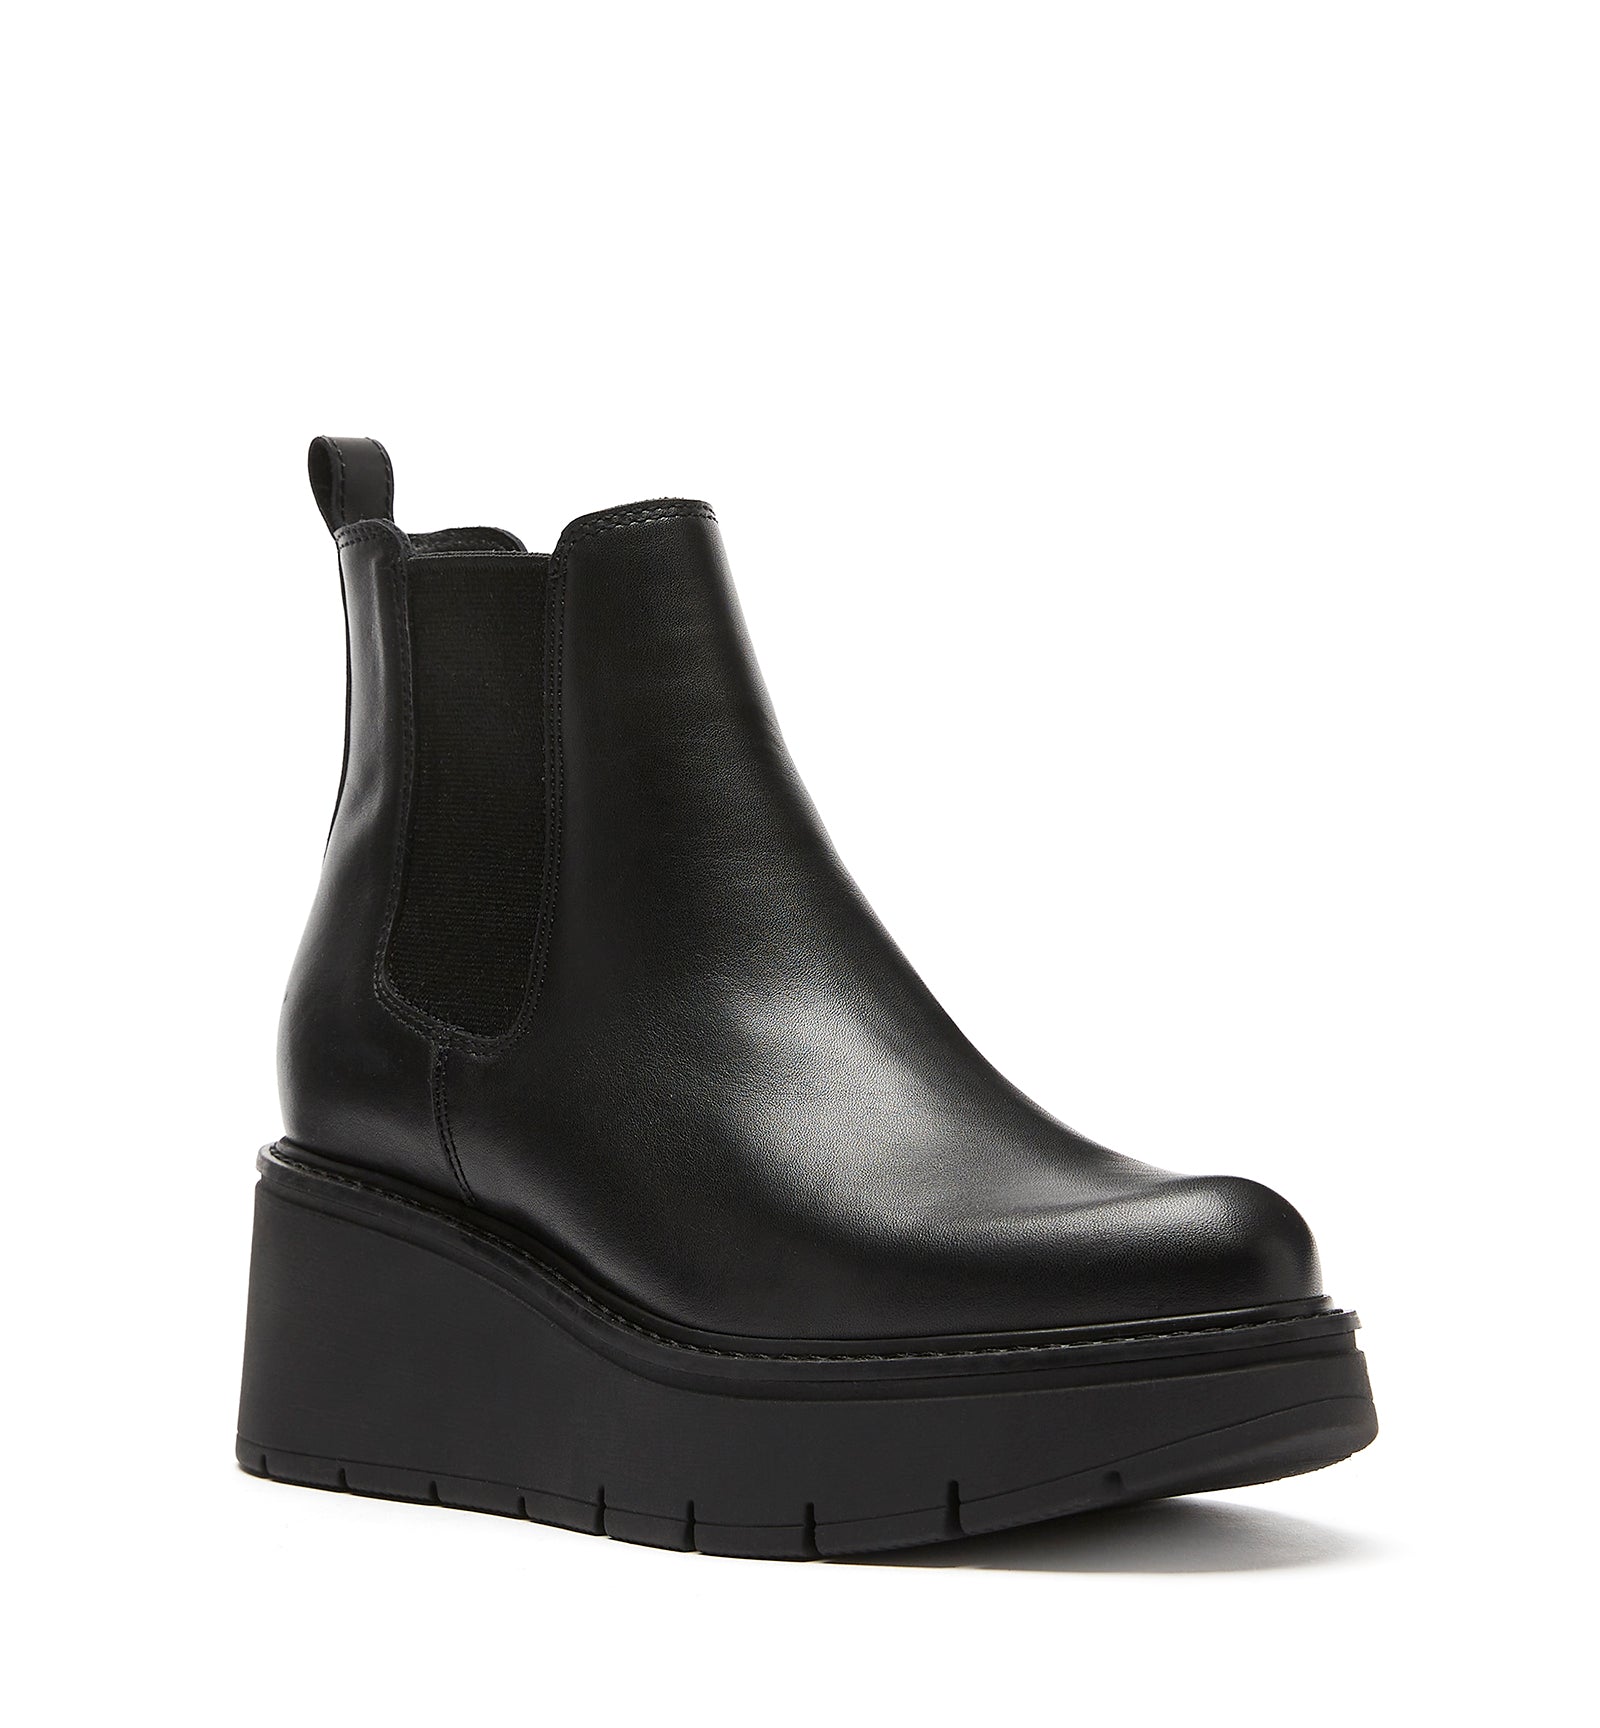 Grant Leather Boot in Black